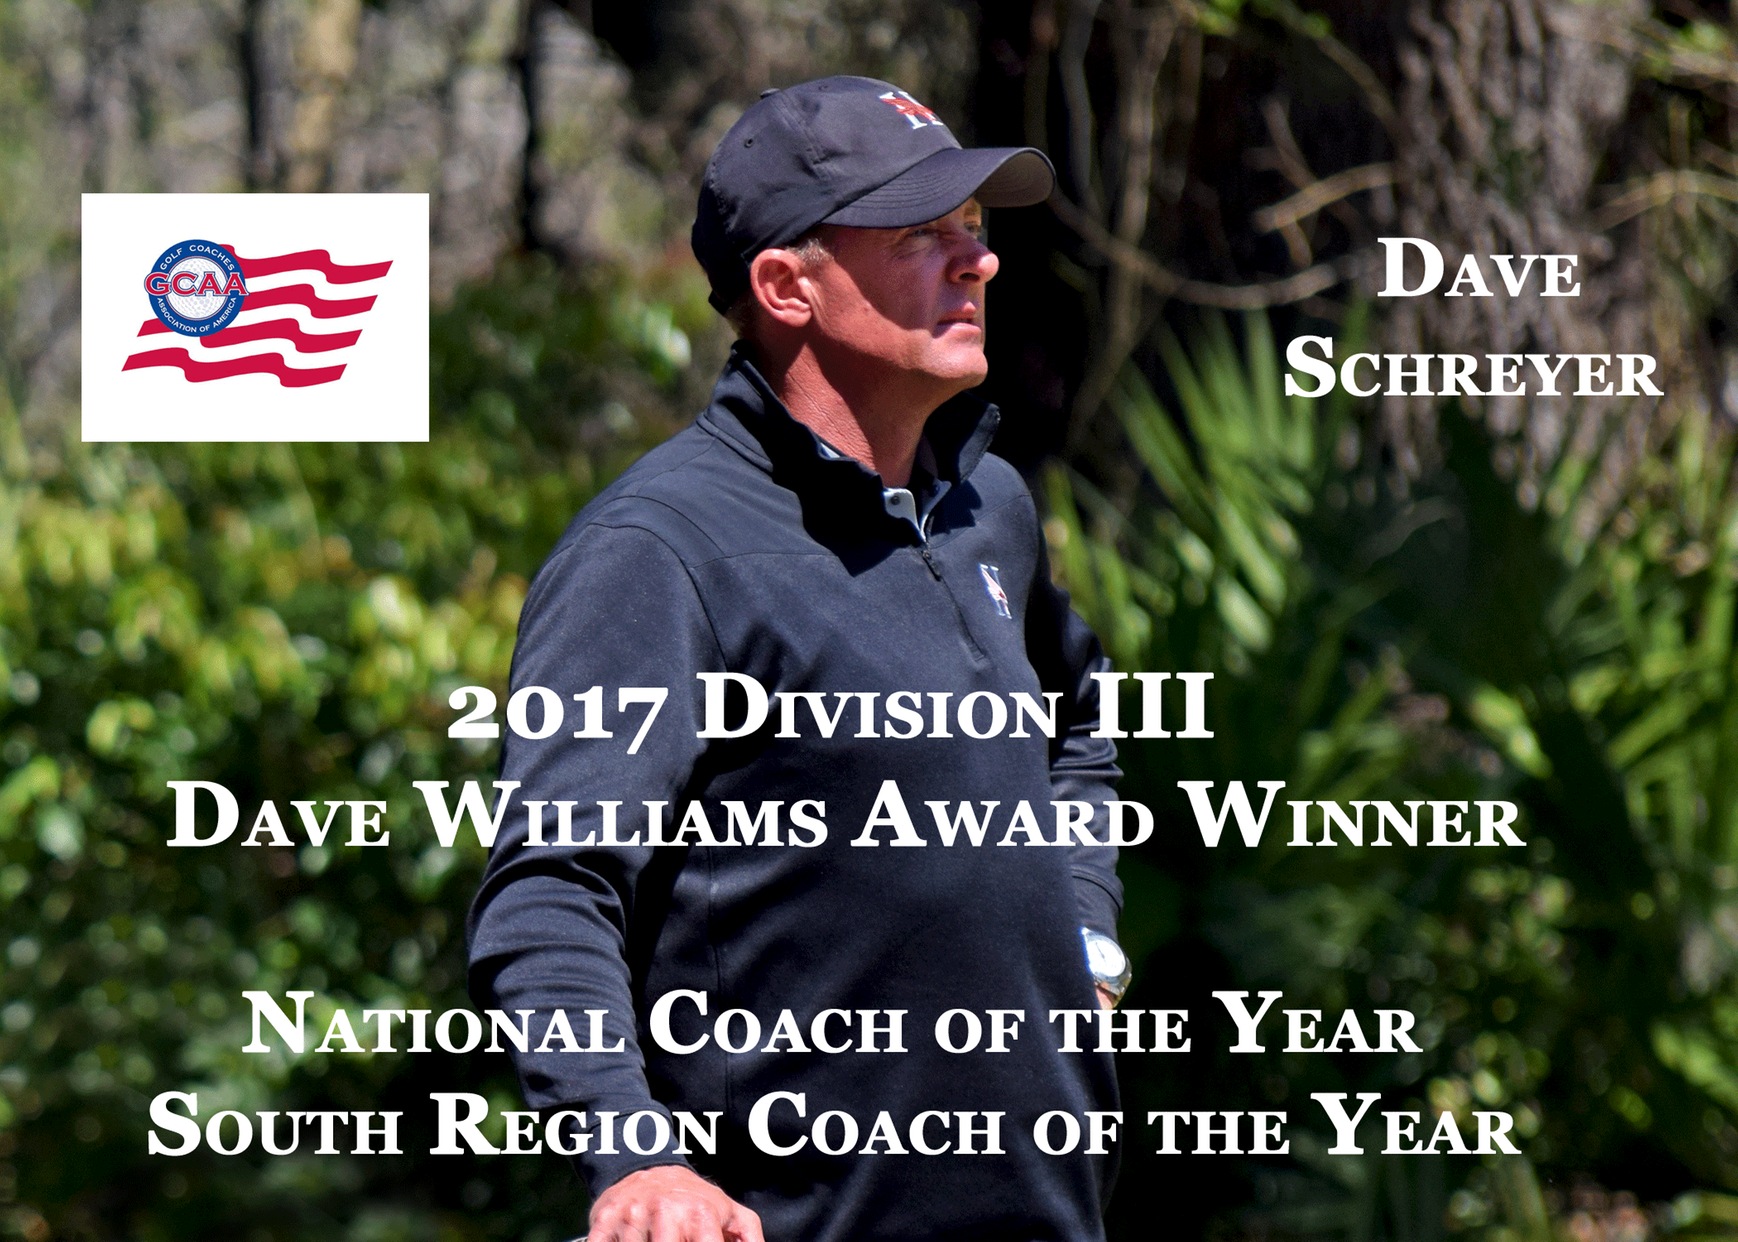 Schreyer recognized as Division III Coach of the Year